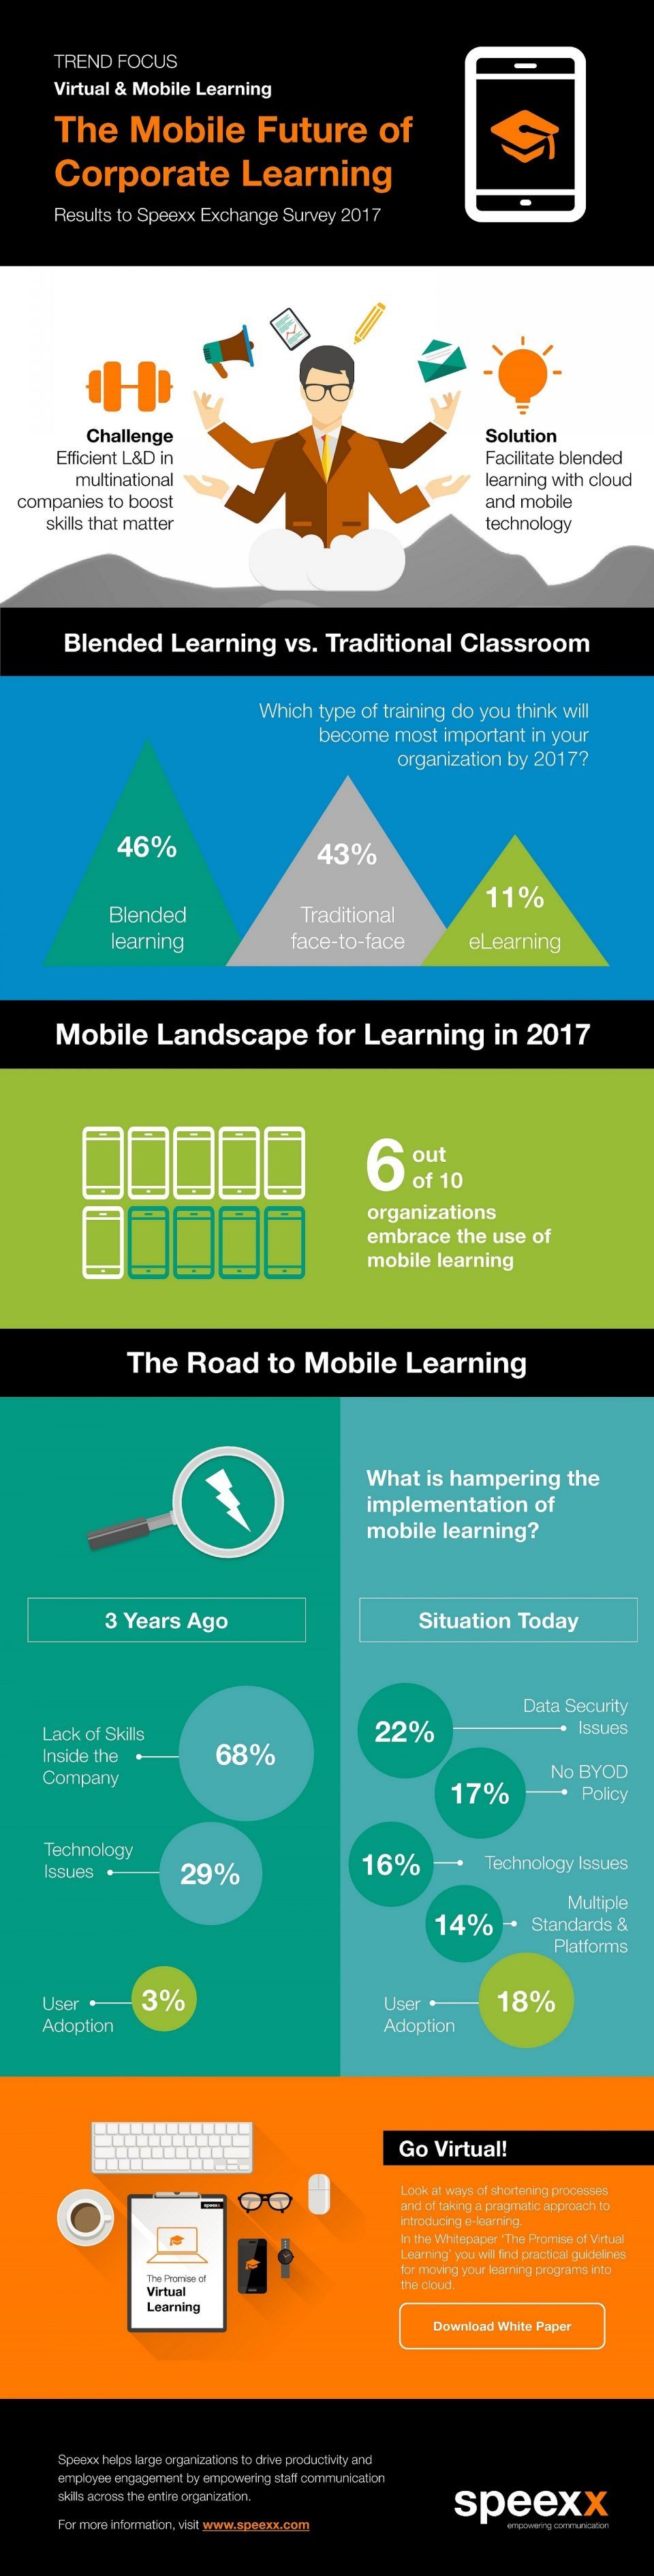 The Mobile Future of Corporate Learning Infographic